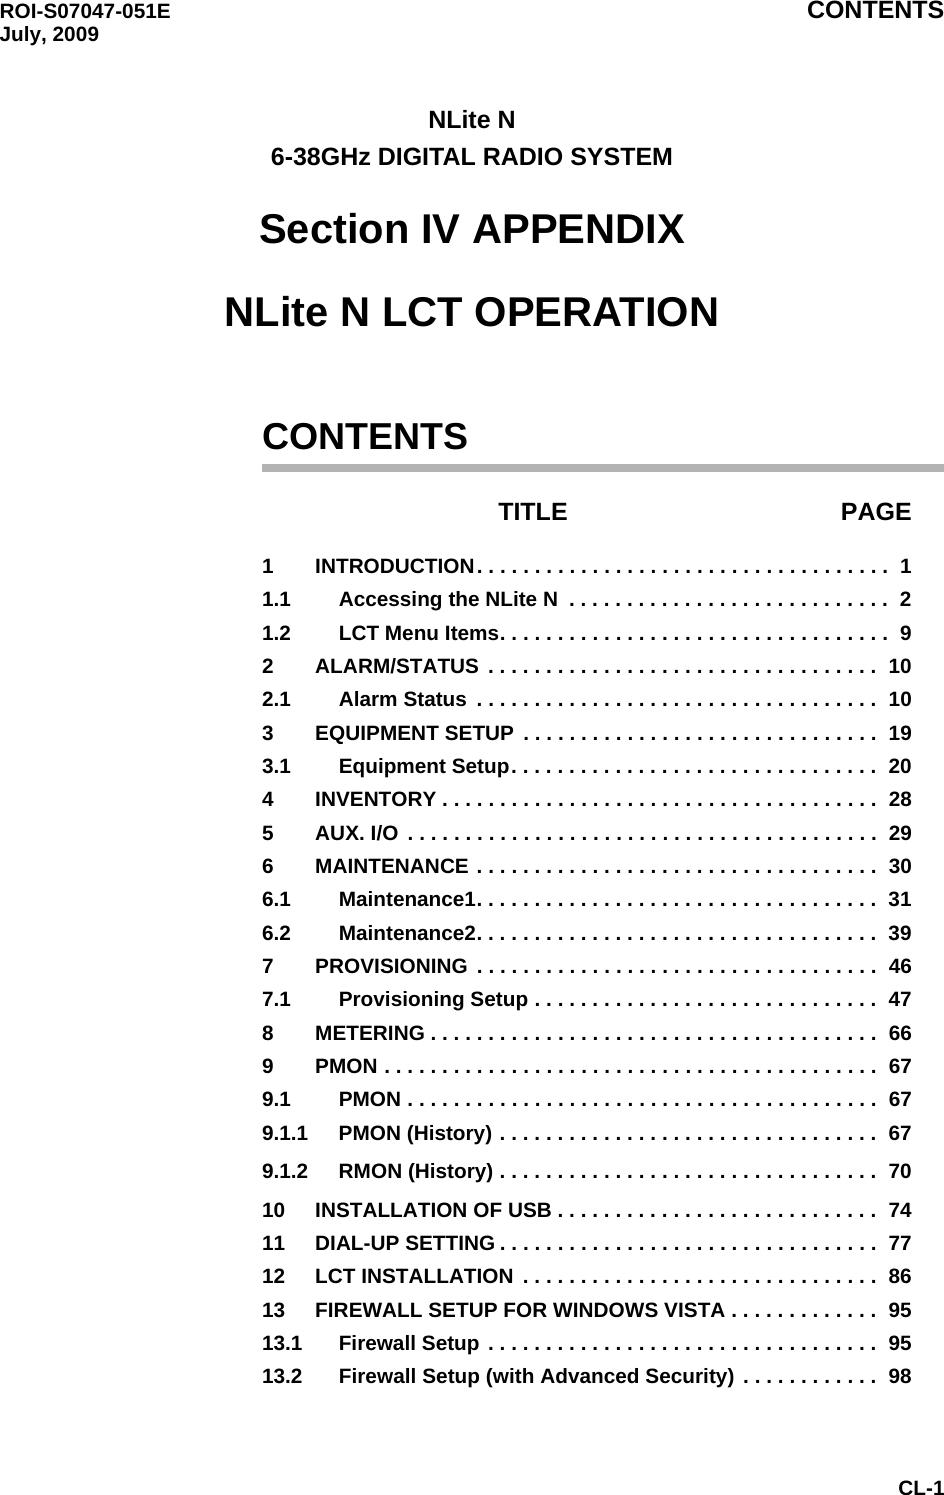 ROI-S07047-051E CONTENTSJuly, 2009CL-1NLite N6-38GHz DIGITAL RADIO SYSTEMSection IV APPENDIXNLite N LCT OPERATIONCONTENTSTITLE PAGE1 INTRODUCTION. . . . . . . . . . . . . . . . . . . . . . . . . . . . . . . . . . . .  11.1 Accessing the NLite N  . . . . . . . . . . . . . . . . . . . . . . . . . . . .  21.2 LCT Menu Items. . . . . . . . . . . . . . . . . . . . . . . . . . . . . . . . . .  92 ALARM/STATUS  . . . . . . . . . . . . . . . . . . . . . . . . . . . . . . . . . .  102.1 Alarm Status  . . . . . . . . . . . . . . . . . . . . . . . . . . . . . . . . . . .  103 EQUIPMENT SETUP . . . . . . . . . . . . . . . . . . . . . . . . . . . . . . .  193.1 Equipment Setup. . . . . . . . . . . . . . . . . . . . . . . . . . . . . . . .  204 INVENTORY . . . . . . . . . . . . . . . . . . . . . . . . . . . . . . . . . . . . . .  285 AUX. I/O  . . . . . . . . . . . . . . . . . . . . . . . . . . . . . . . . . . . . . . . . .  296 MAINTENANCE . . . . . . . . . . . . . . . . . . . . . . . . . . . . . . . . . . .  306.1 Maintenance1. . . . . . . . . . . . . . . . . . . . . . . . . . . . . . . . . . .  316.2 Maintenance2. . . . . . . . . . . . . . . . . . . . . . . . . . . . . . . . . . .  397 PROVISIONING  . . . . . . . . . . . . . . . . . . . . . . . . . . . . . . . . . . .  467.1 Provisioning Setup . . . . . . . . . . . . . . . . . . . . . . . . . . . . . .  478 METERING . . . . . . . . . . . . . . . . . . . . . . . . . . . . . . . . . . . . . . .  669 PMON . . . . . . . . . . . . . . . . . . . . . . . . . . . . . . . . . . . . . . . . . . .  679.1 PMON . . . . . . . . . . . . . . . . . . . . . . . . . . . . . . . . . . . . . . . . .  679.1.1 PMON (History) . . . . . . . . . . . . . . . . . . . . . . . . . . . . . . . . .  679.1.2 RMON (History) . . . . . . . . . . . . . . . . . . . . . . . . . . . . . . . . .  7010 INSTALLATION OF USB . . . . . . . . . . . . . . . . . . . . . . . . . . . .  7411 DIAL-UP SETTING . . . . . . . . . . . . . . . . . . . . . . . . . . . . . . . . .  7712 LCT INSTALLATION . . . . . . . . . . . . . . . . . . . . . . . . . . . . . . .  8613 FIREWALL SETUP FOR WINDOWS VISTA . . . . . . . . . . . . .  9513.1 Firewall Setup . . . . . . . . . . . . . . . . . . . . . . . . . . . . . . . . . .  9513.2 Firewall Setup (with Advanced Security) . . . . . . . . . . . .  98